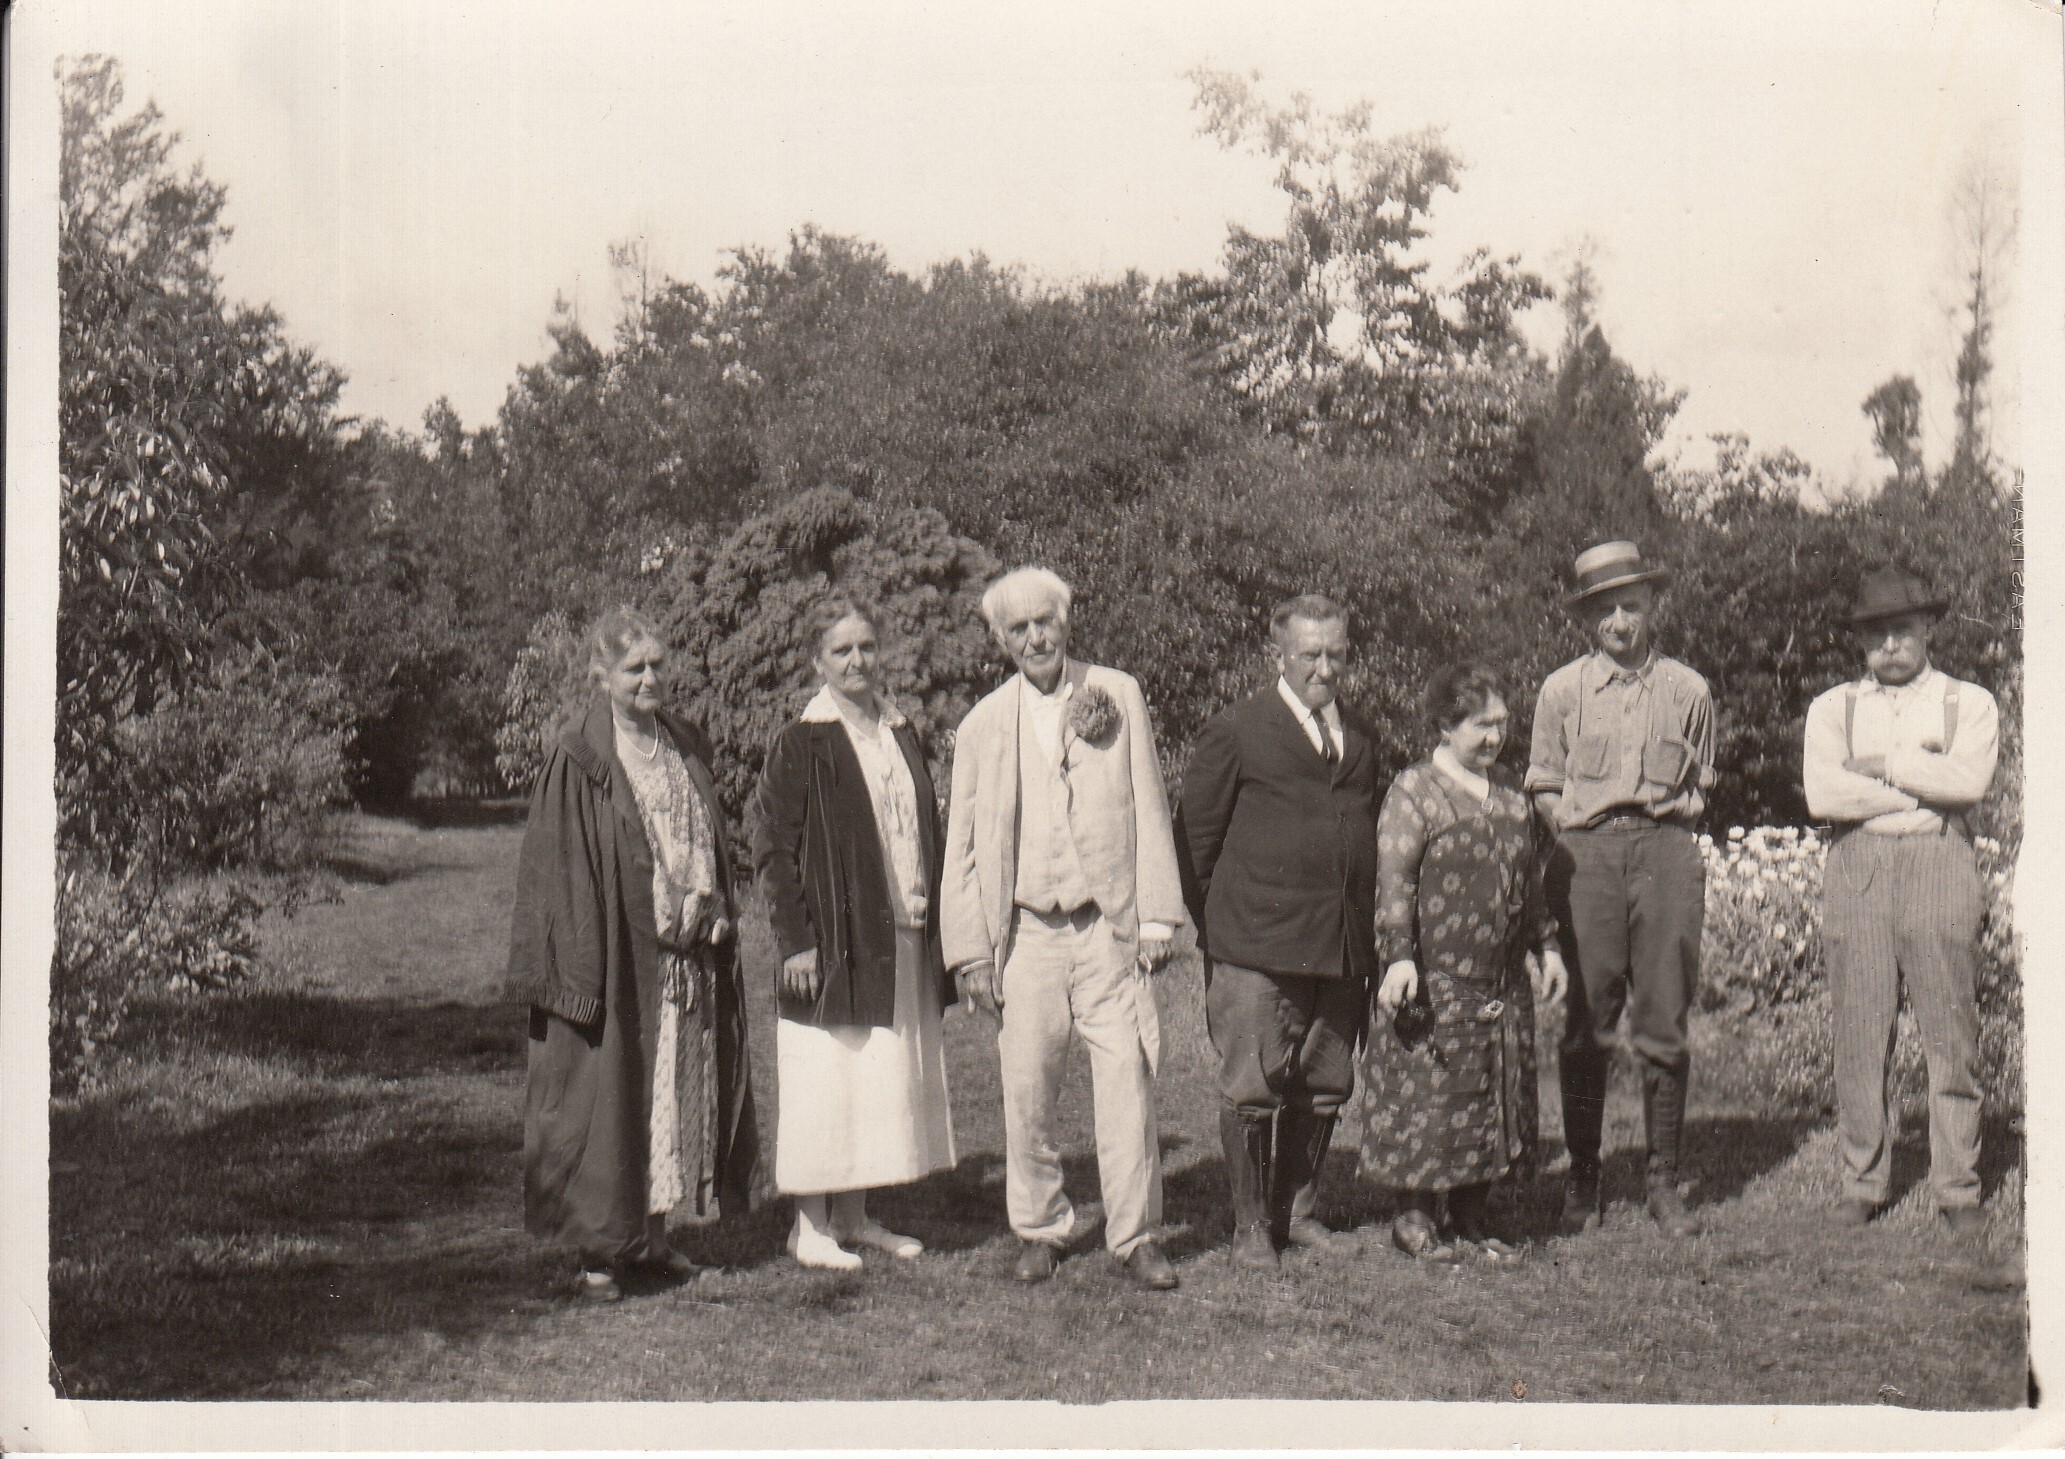 Thomas Edison and Mina Edison with Margaret Dreier Robins (wife of Raymond Robins), second from left, and others at the Robins house.